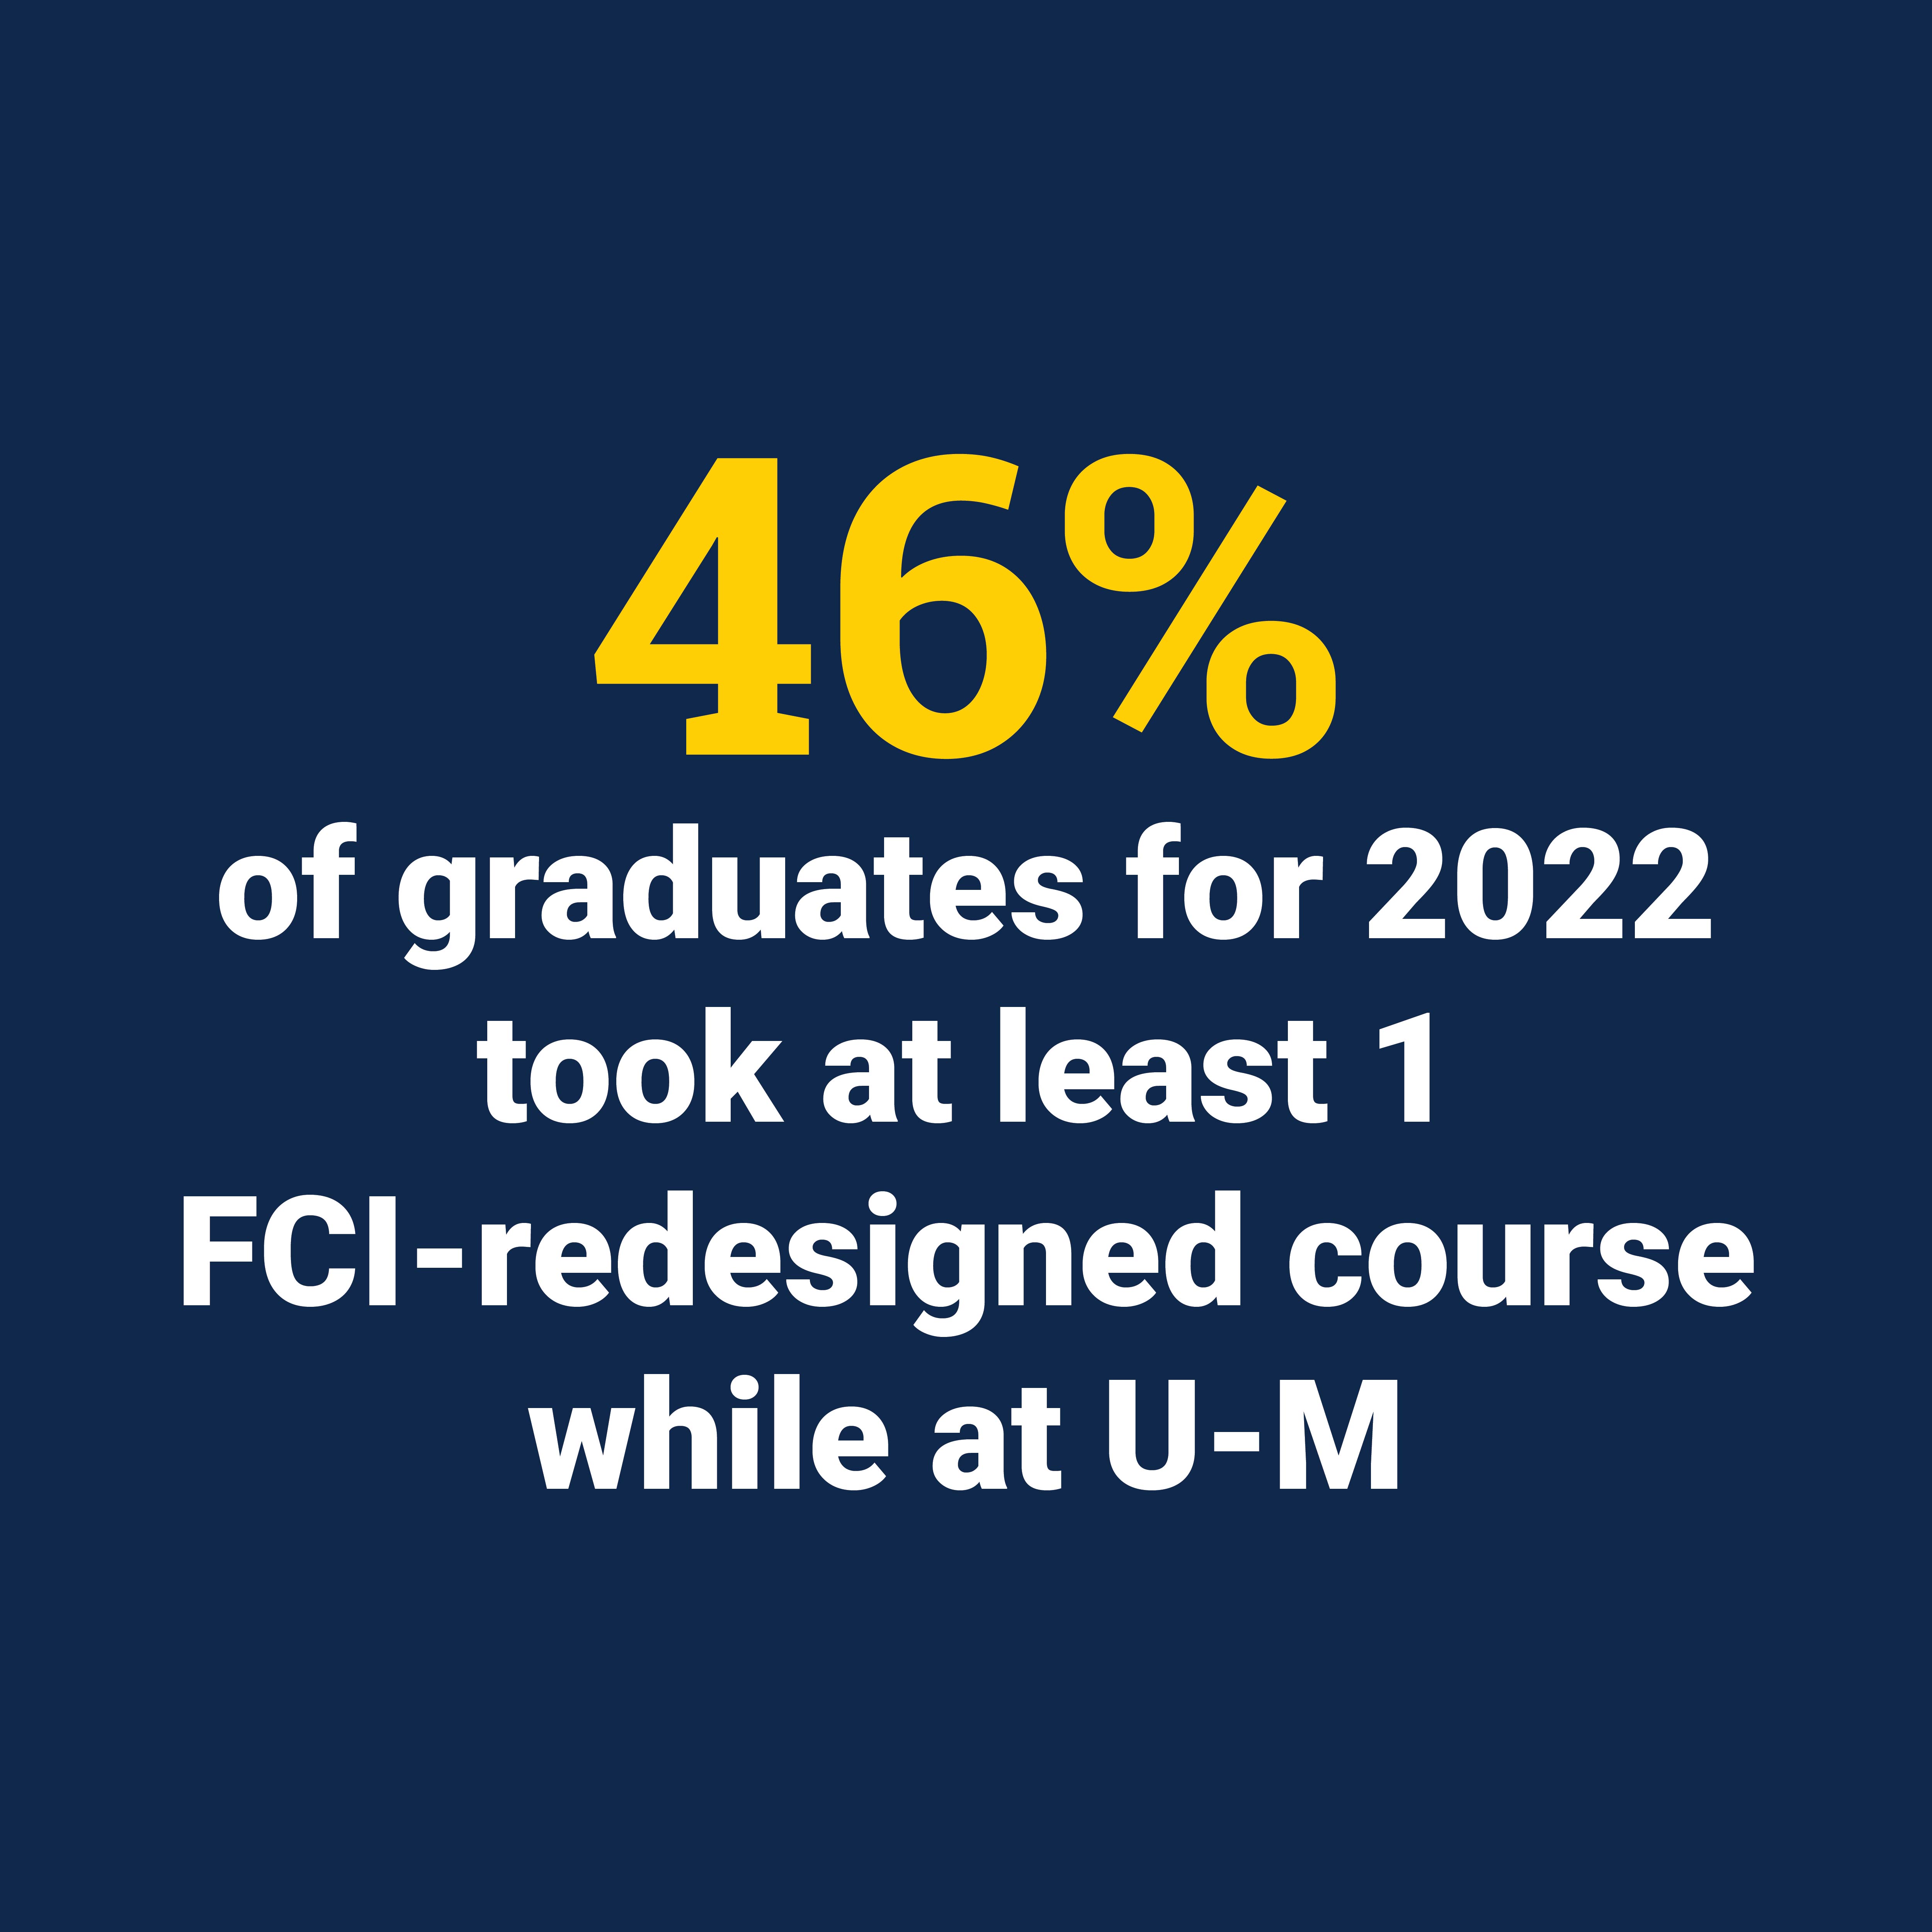 46% of graduates for 2022 took at least 1 FCI-redesigned course while at U-M